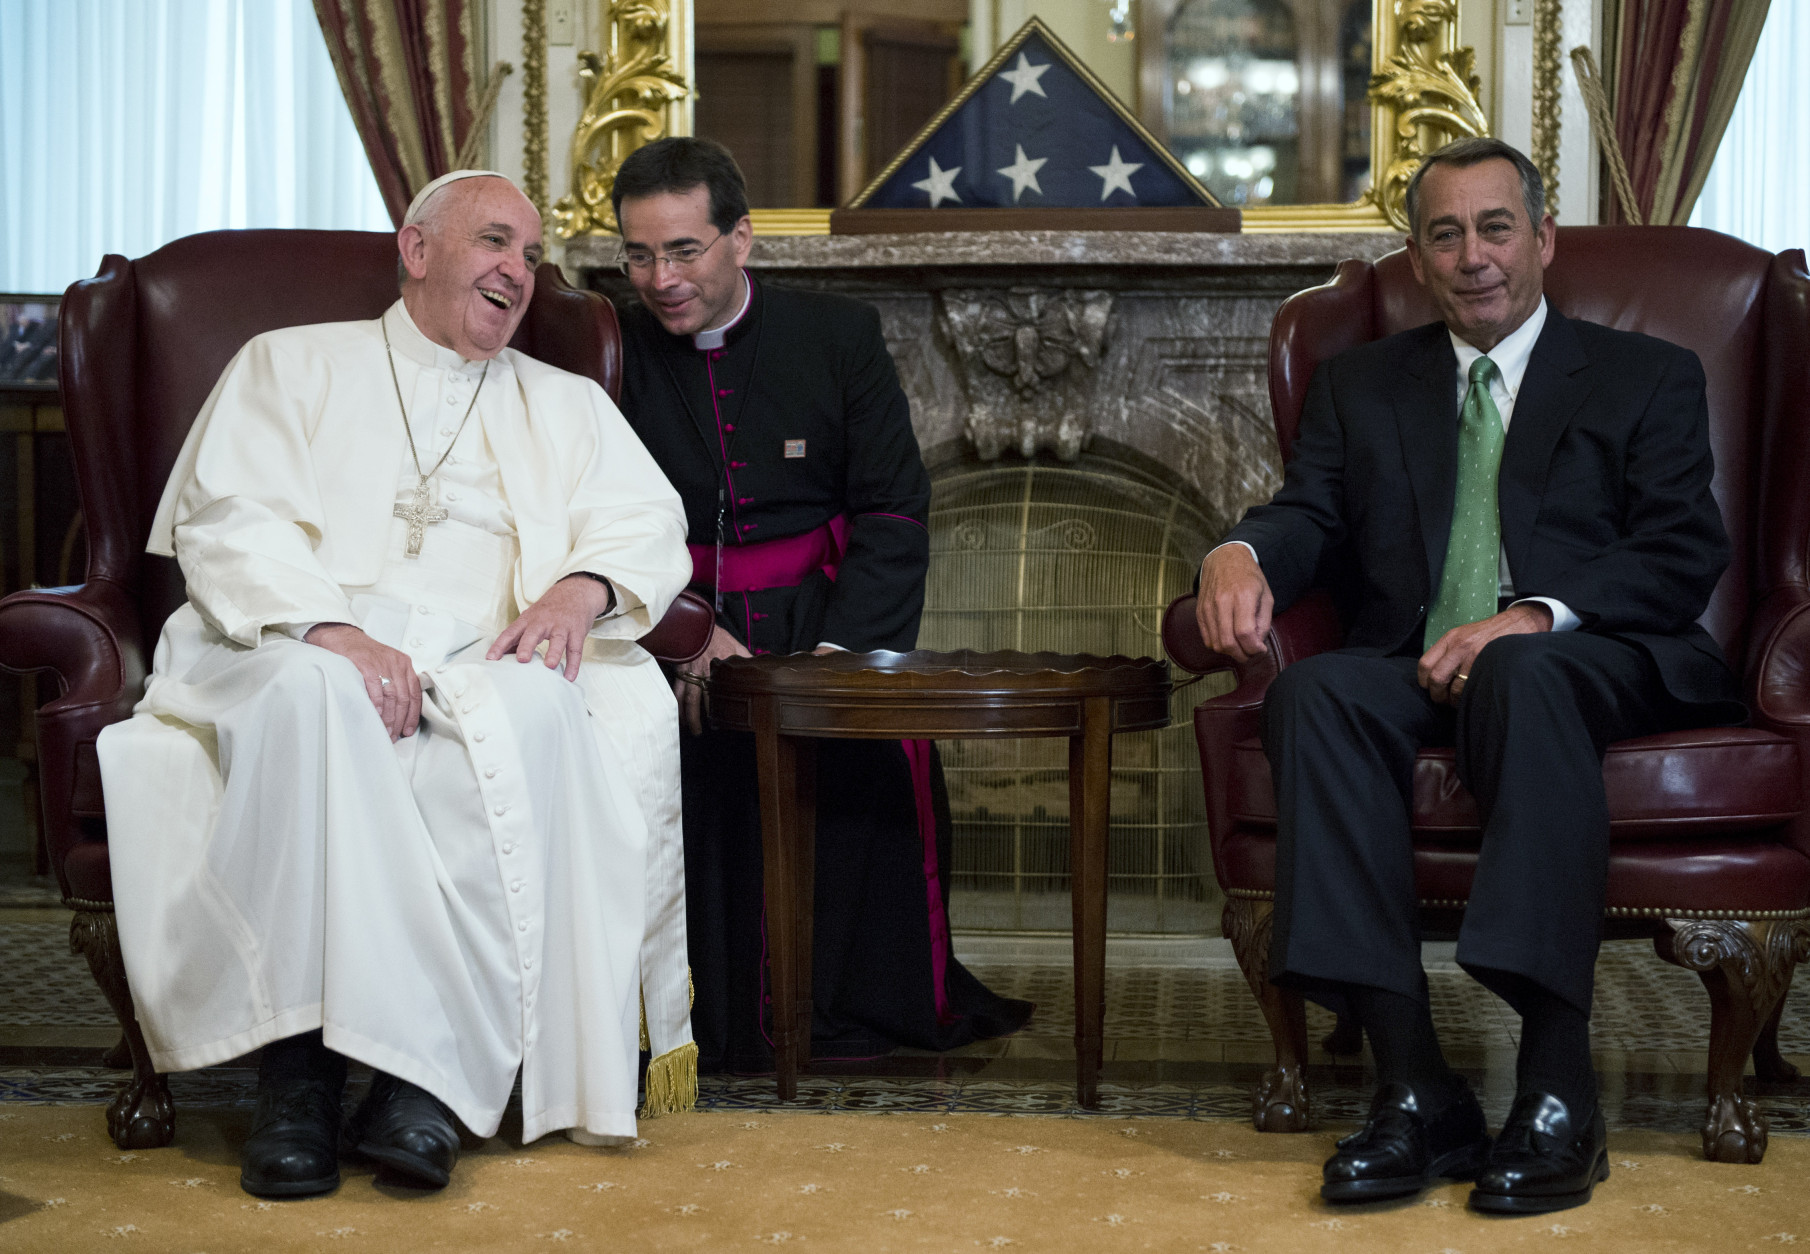 WASHINGTON, DC - SEPTEMBER 24:  Speaker of the House John Boehner (R-OH) (R) speaks with Pope Francis (L) in the U.S. Capitol building before the Pontiff speaks to a joint meeting of Congress September 24, 2015 in Washington, DC. Pope Francis will be the first Pope to ever address a joint meeting of Congress. The POpe is on a six-day trip to the U.S., with stops in Washington, New York City and Philedelphia.  (Photo By Bill Clark-PoolGetty Images)